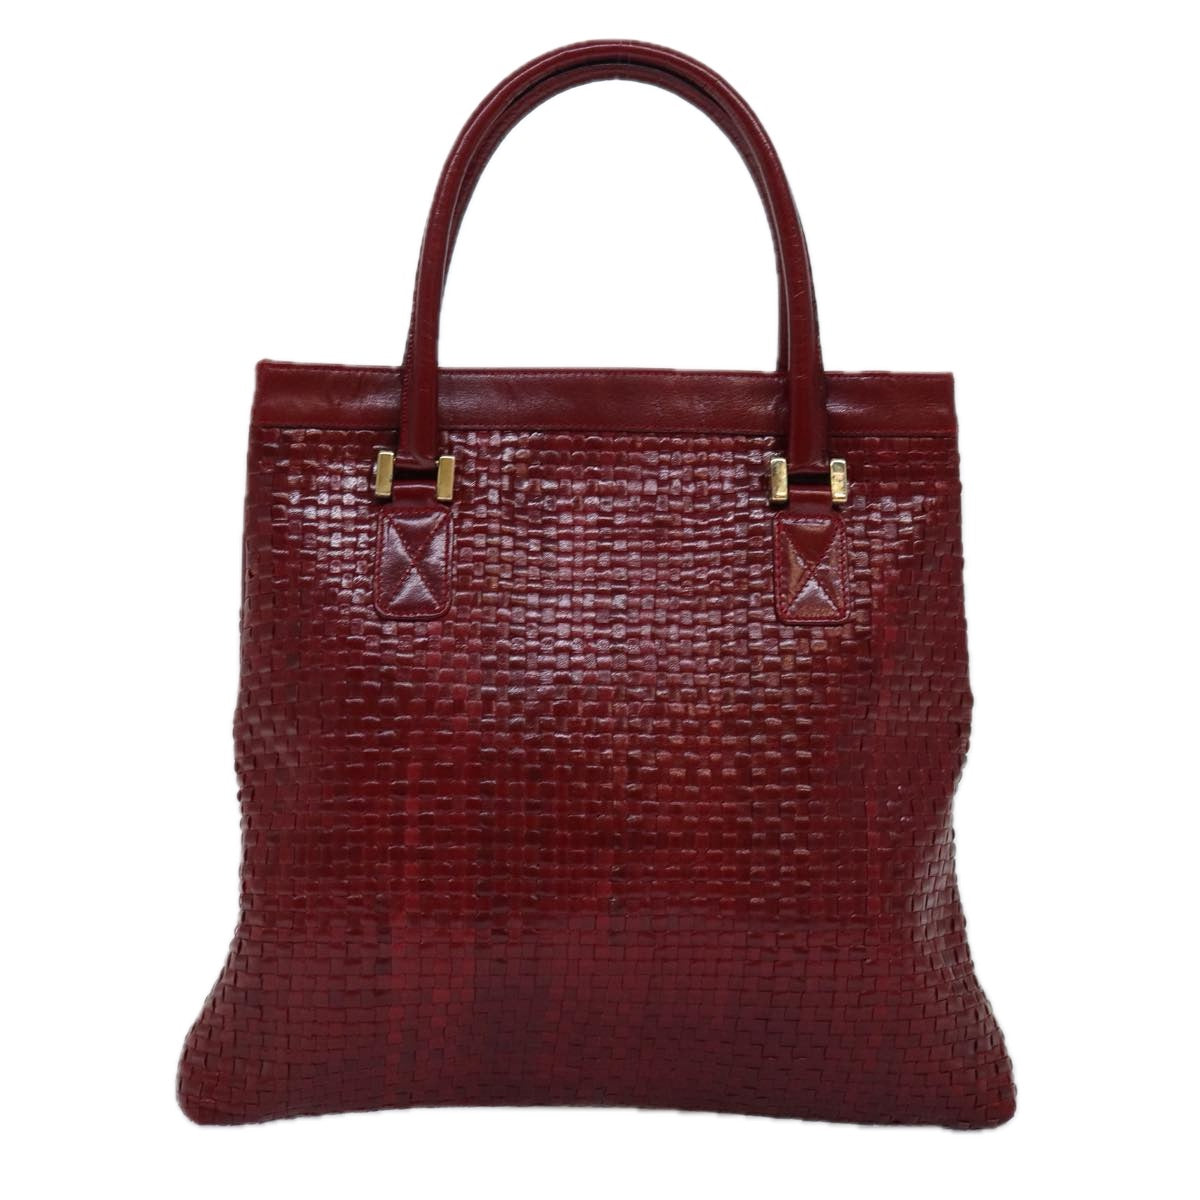 FENDI Tote Bag Leather Red Auth 74221